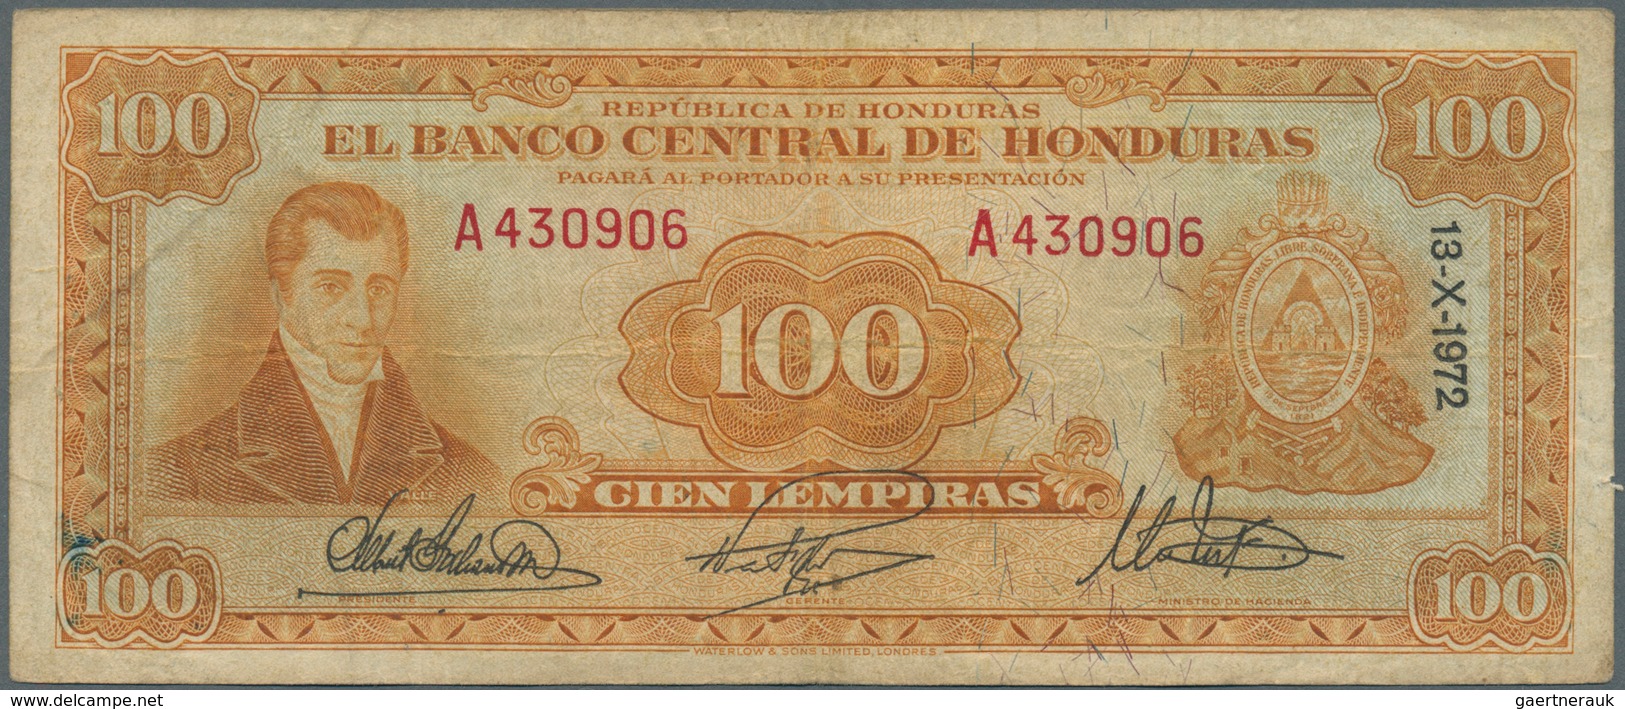 01670 Honduras: 100 Lempiras 1972 P. 49d, Used With Folds And Creases, Stained Paper, 2 Pinholes, But No T - Honduras